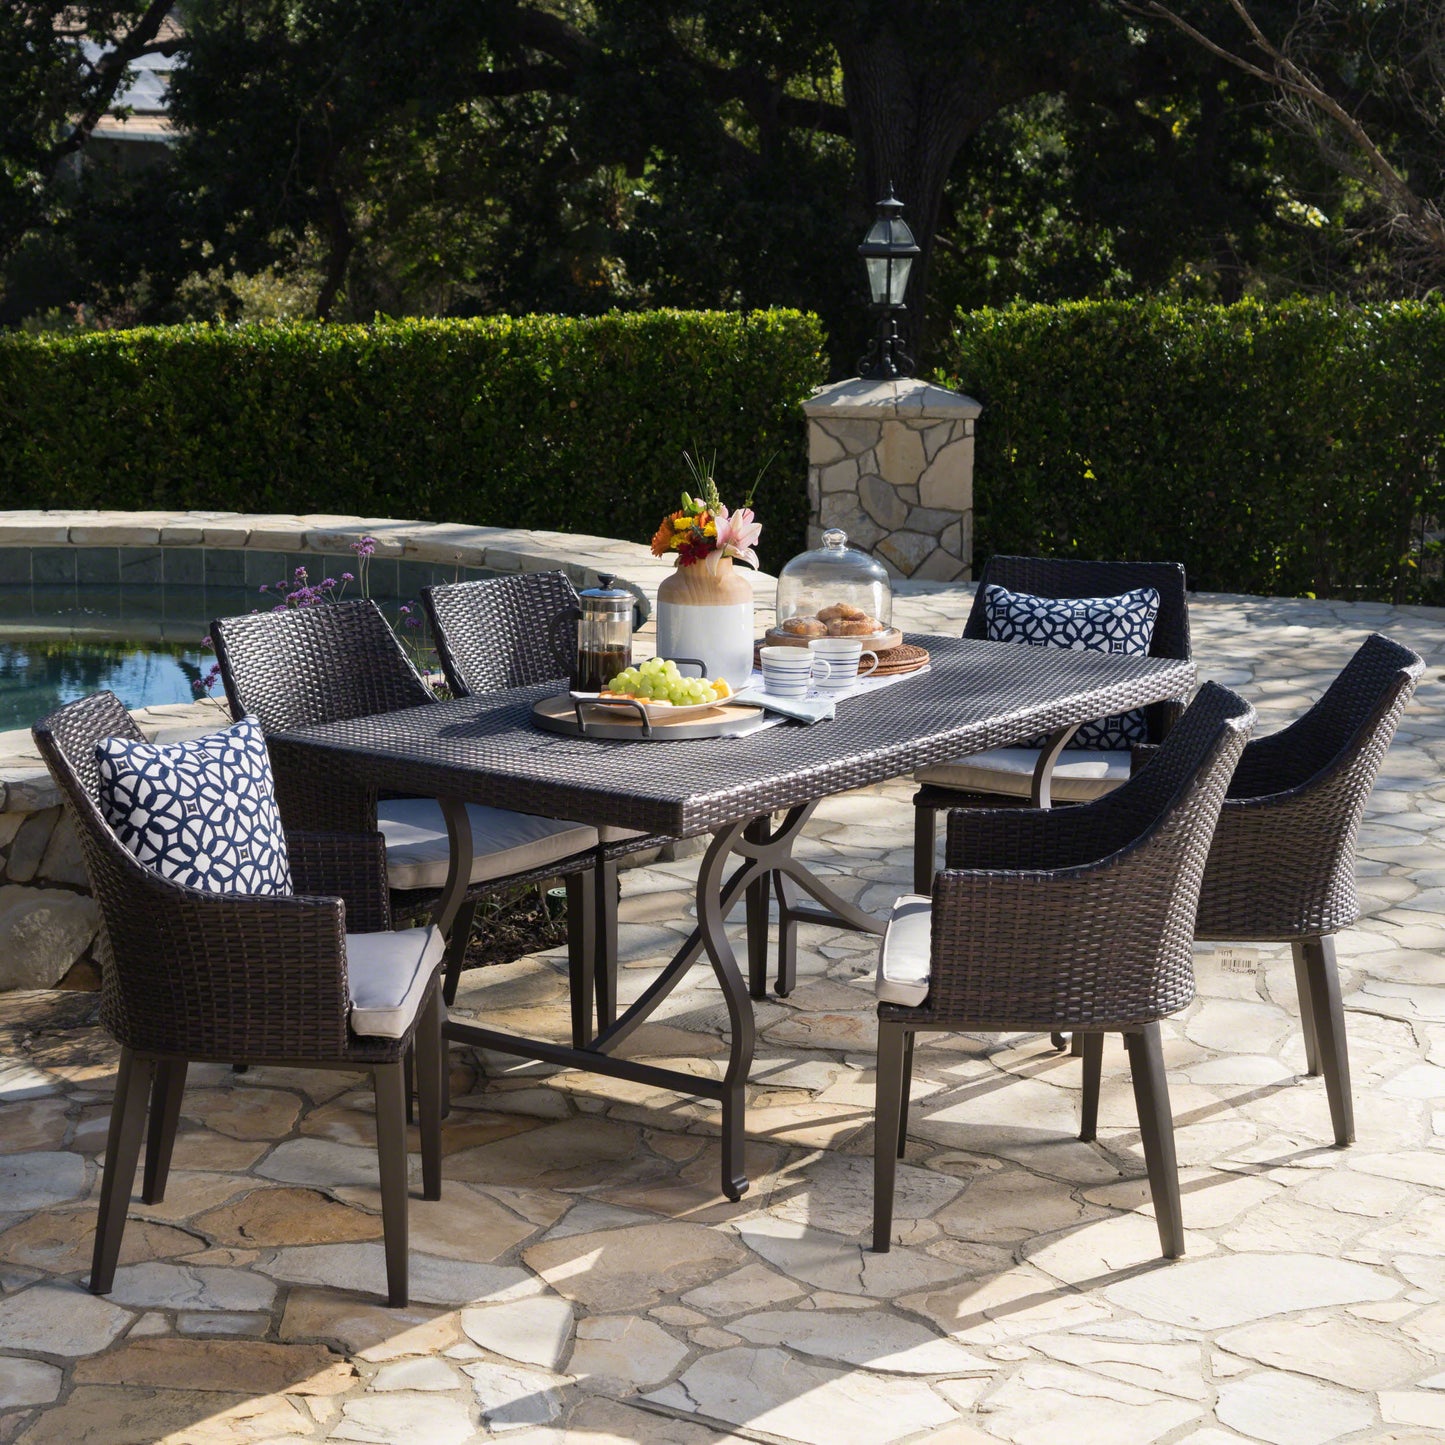 Hartlford Outdoor 7 Piece Wicker Dining Set with Aluminum Framed Dining Table